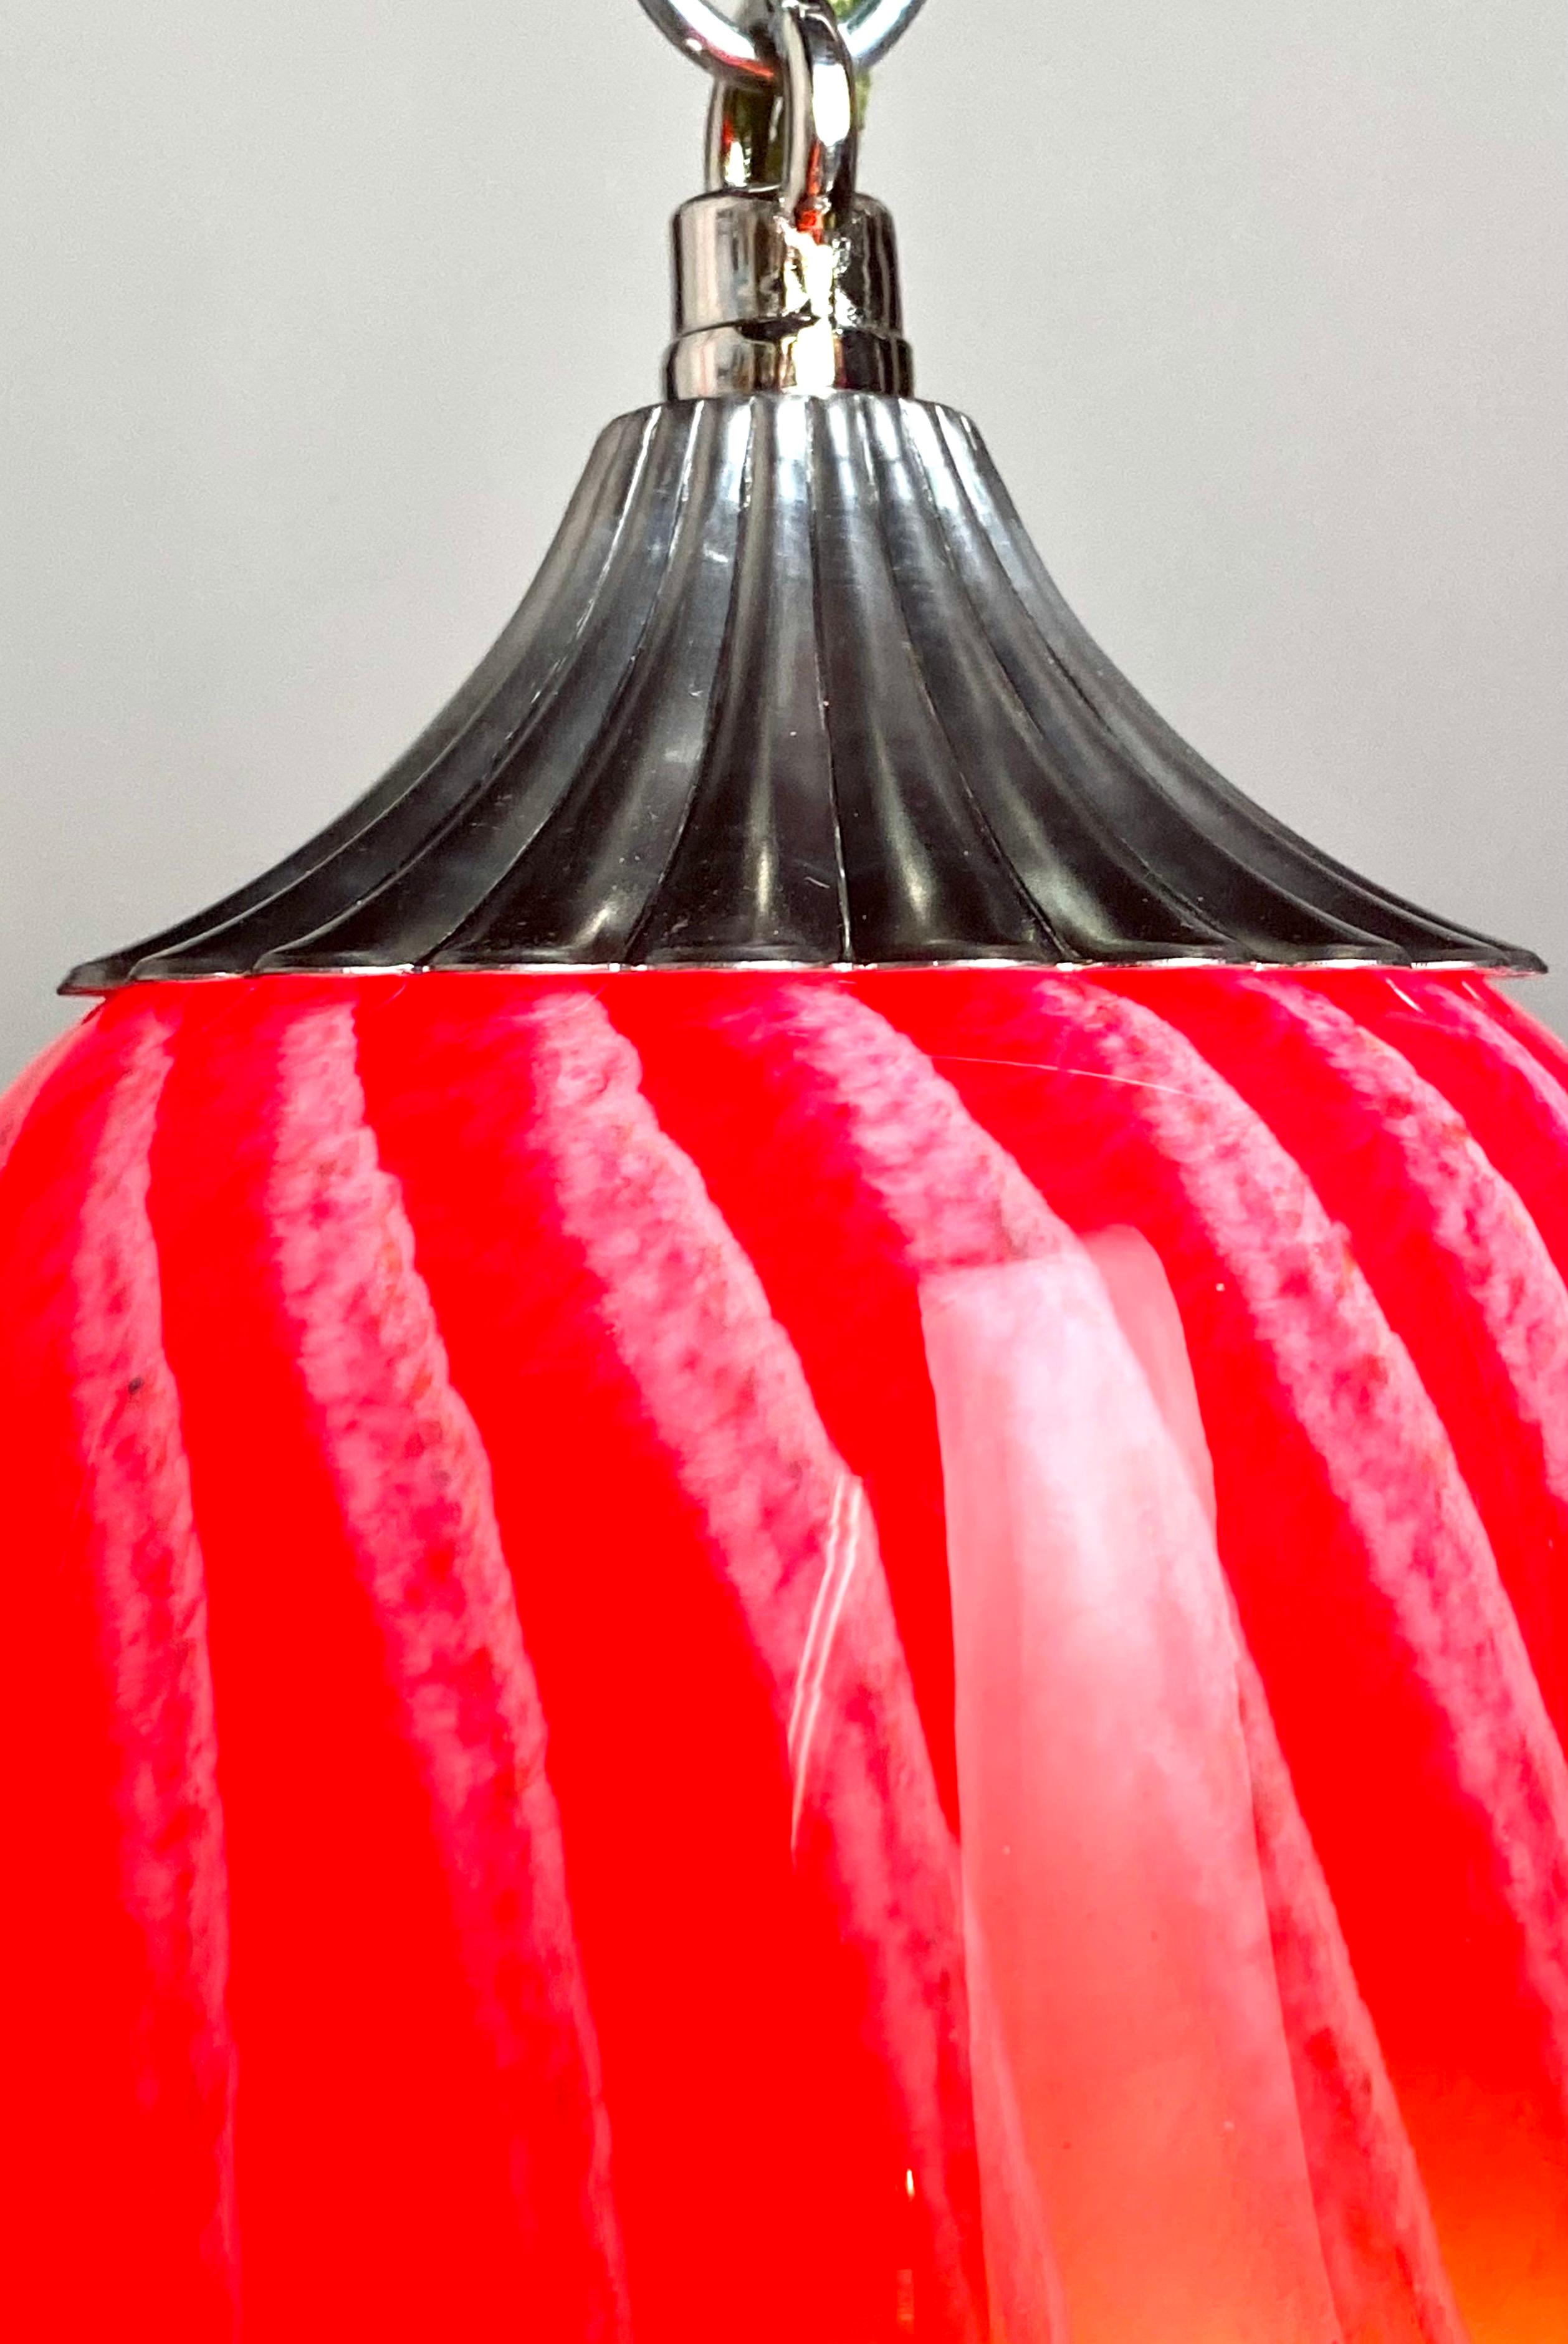 American Red Blown Glass Table or Pendent Light, 21st Century by Mattia Biagi For Sale